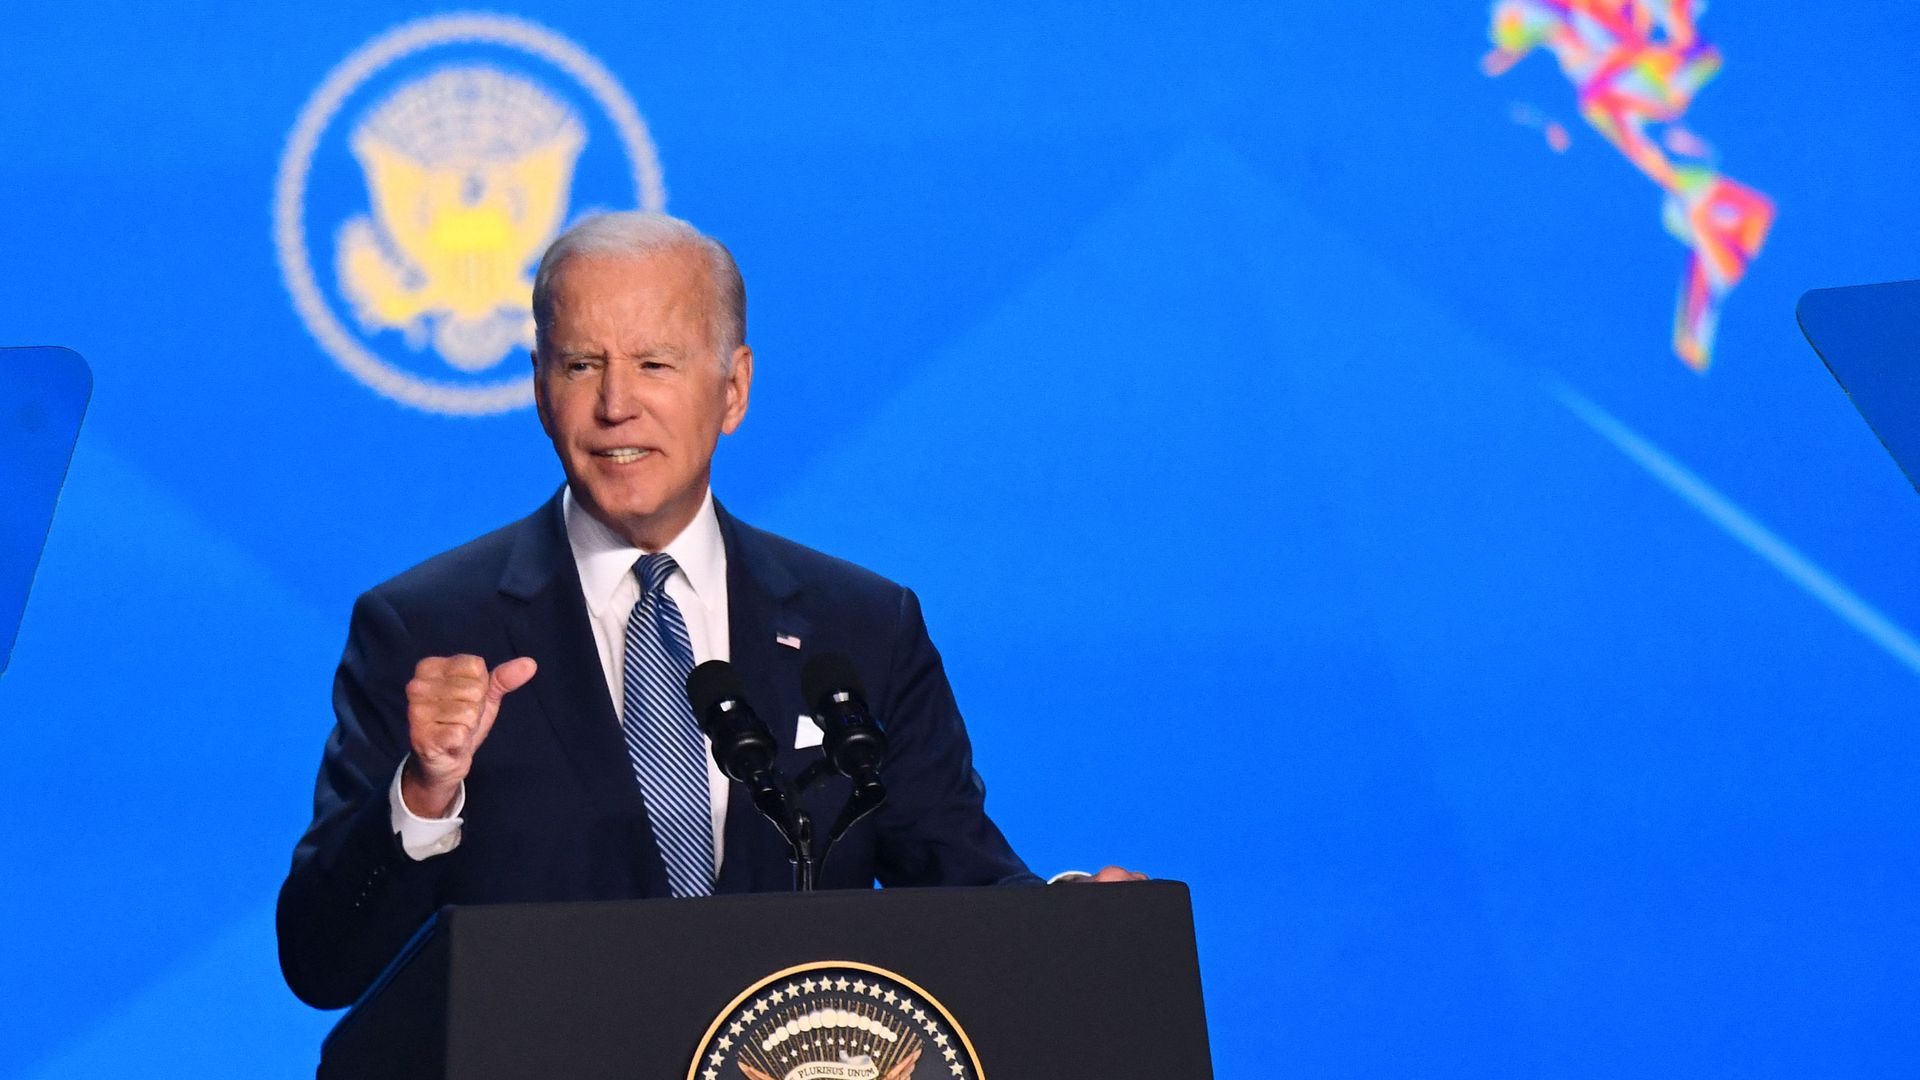 President Joe Biden speaks during opening ceremony of the the 9th Summit of the Americas at the Los Angeles Convention Center in Los Angeles, California on June 8.